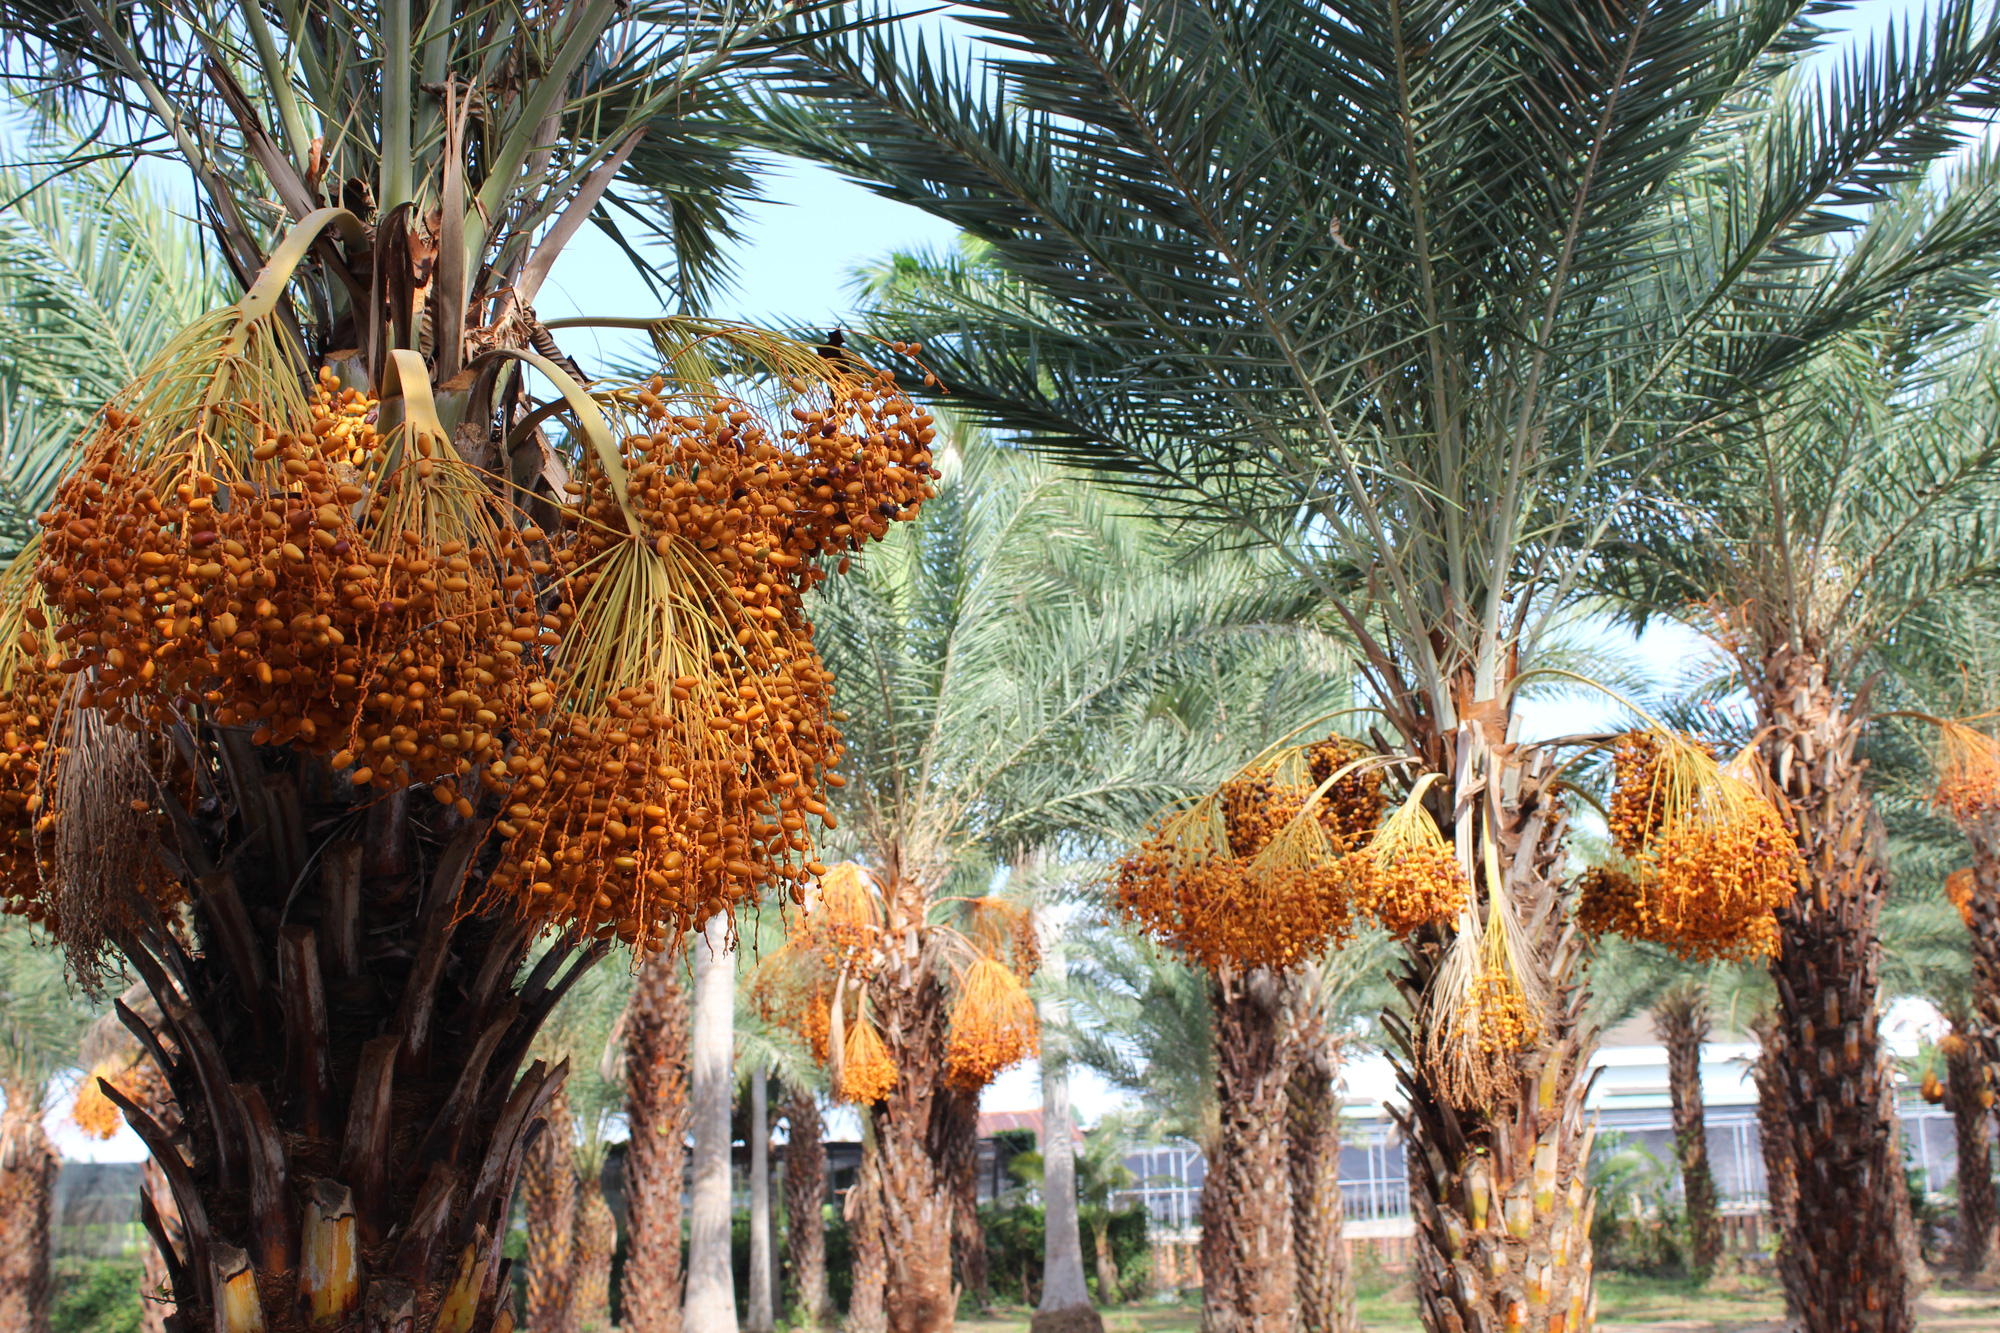 Date palm tree with many large clusters of yellow fruits at a garden in Sa Dec City, Dong Thap Province, Vietnam. Photo: Thai Luy / Tuoi Tre